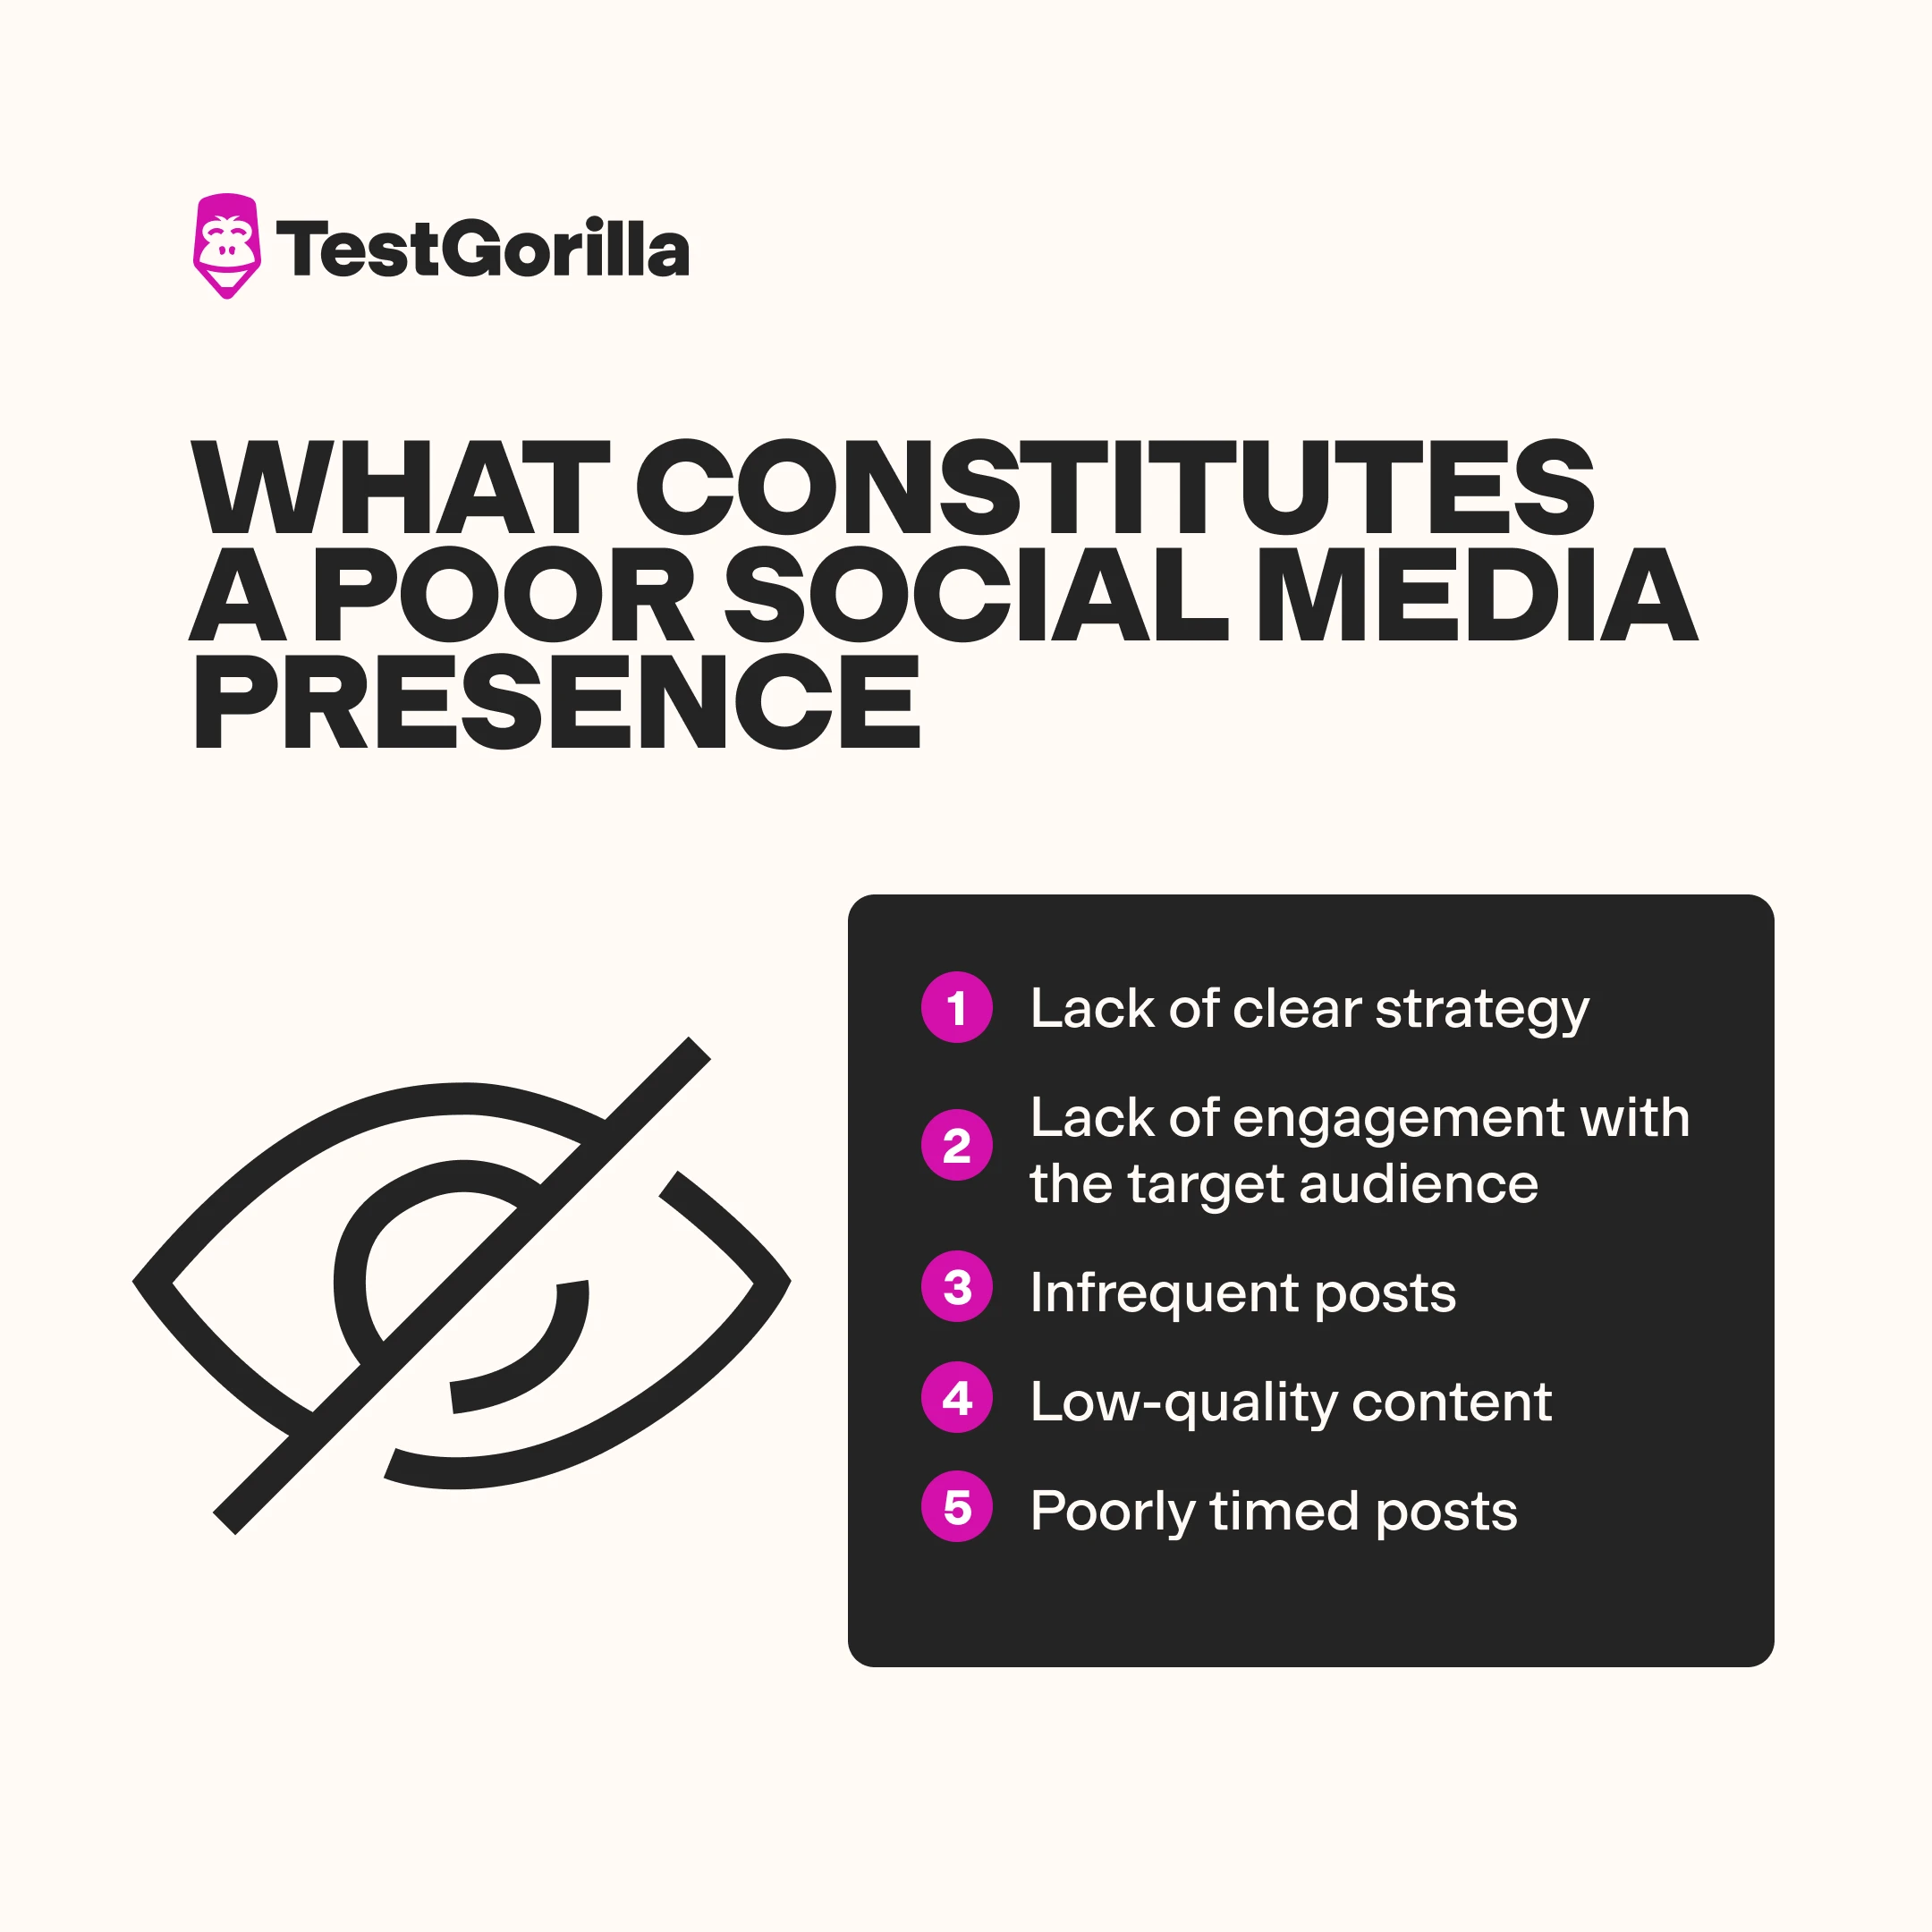 answers to what constitutes a poor social media presence